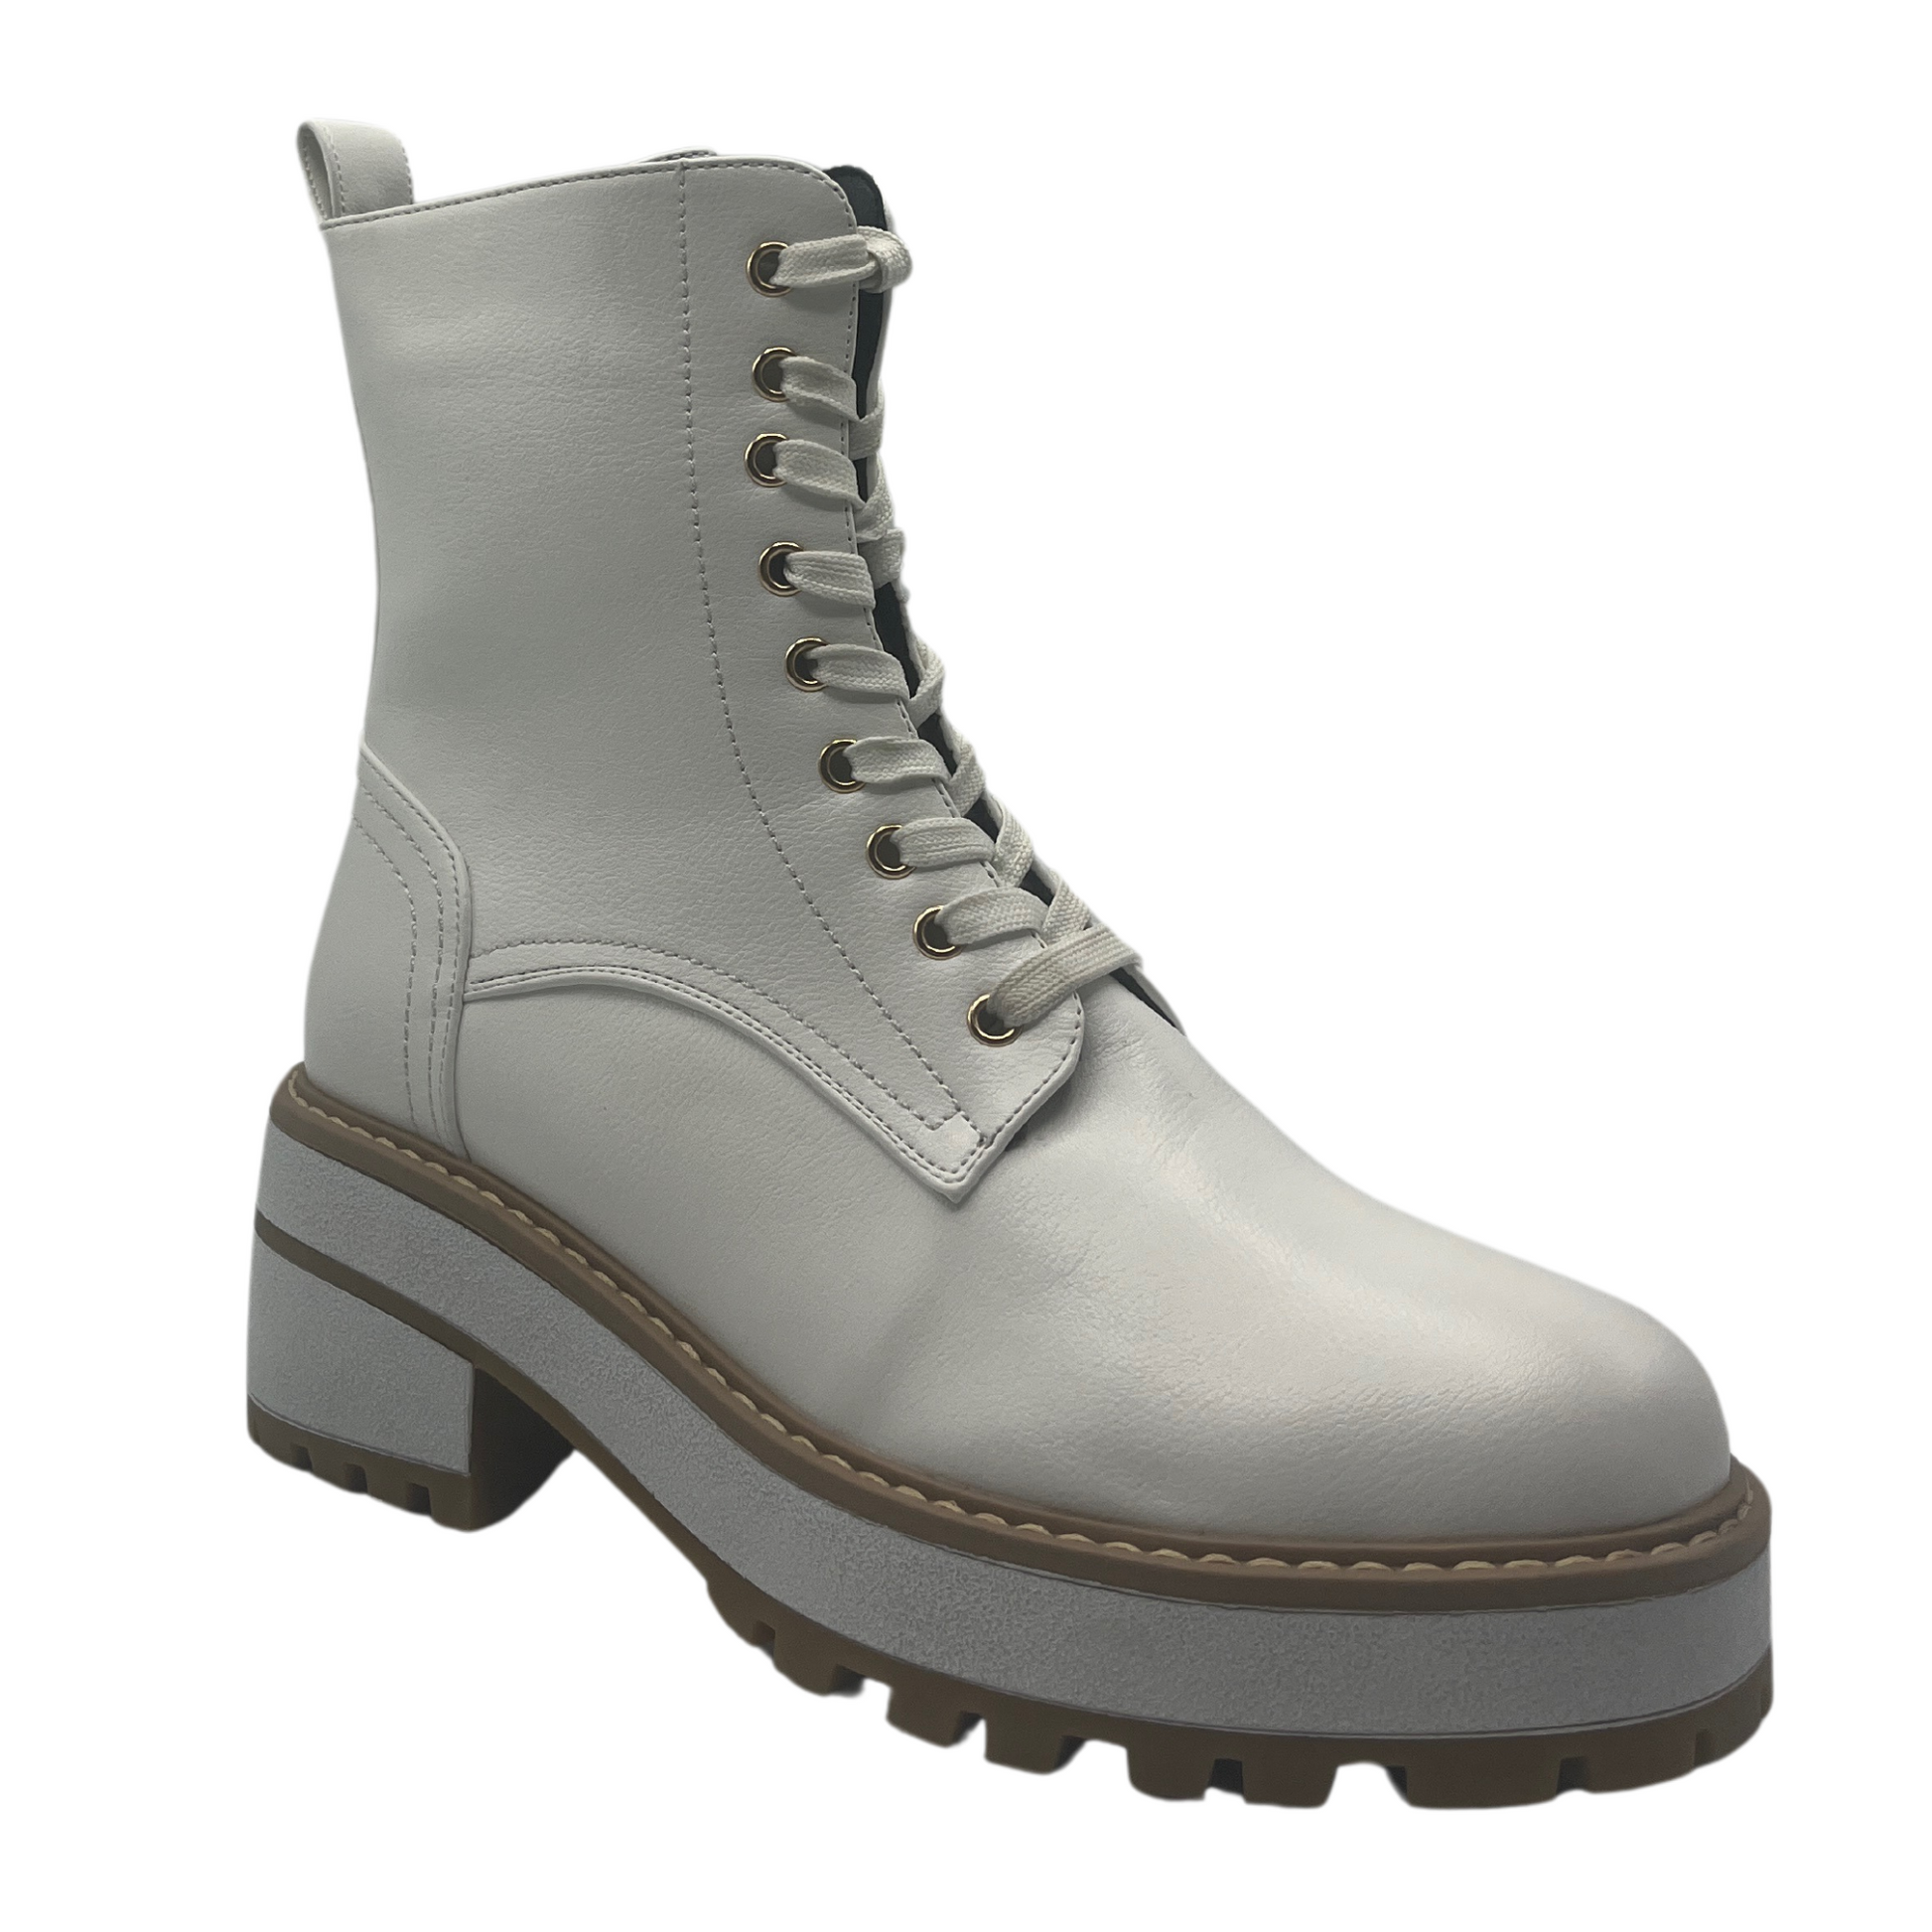 45 degree angled view of white vegan leather boot with lace up front and chunky sole